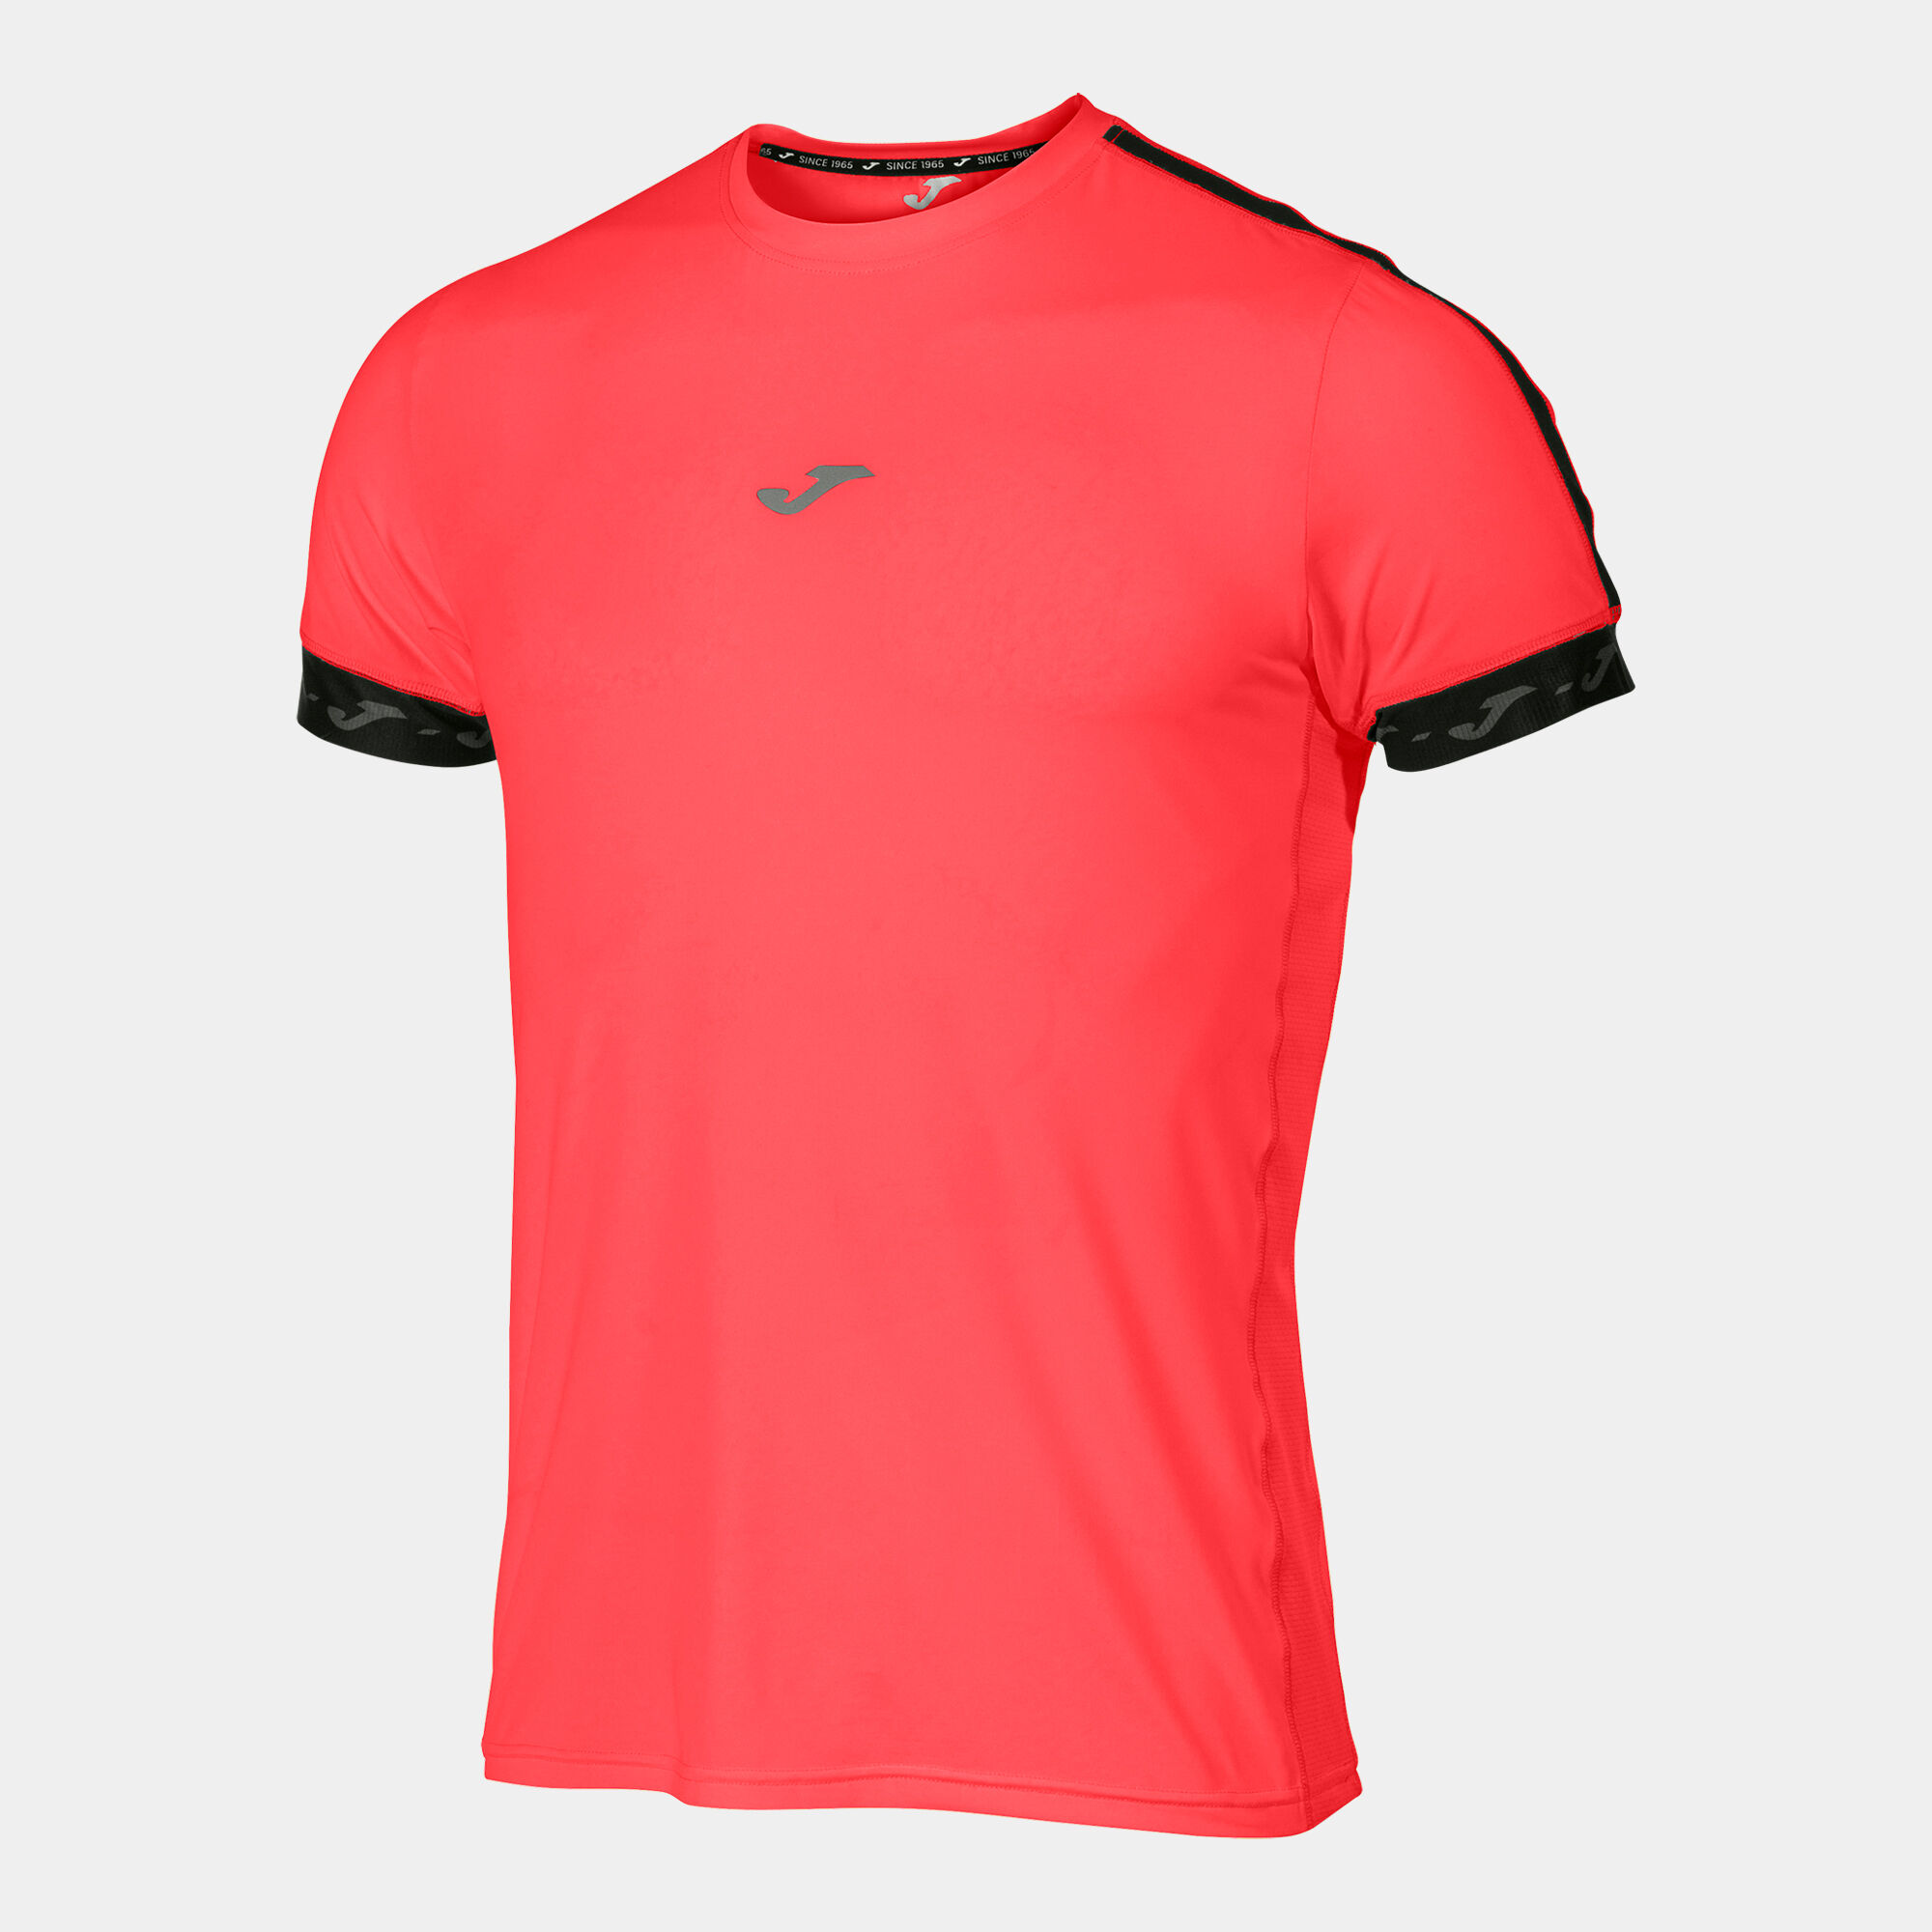 MAILLOT MANCHES COURTES HOMME R-CITY CORAIL FLUO